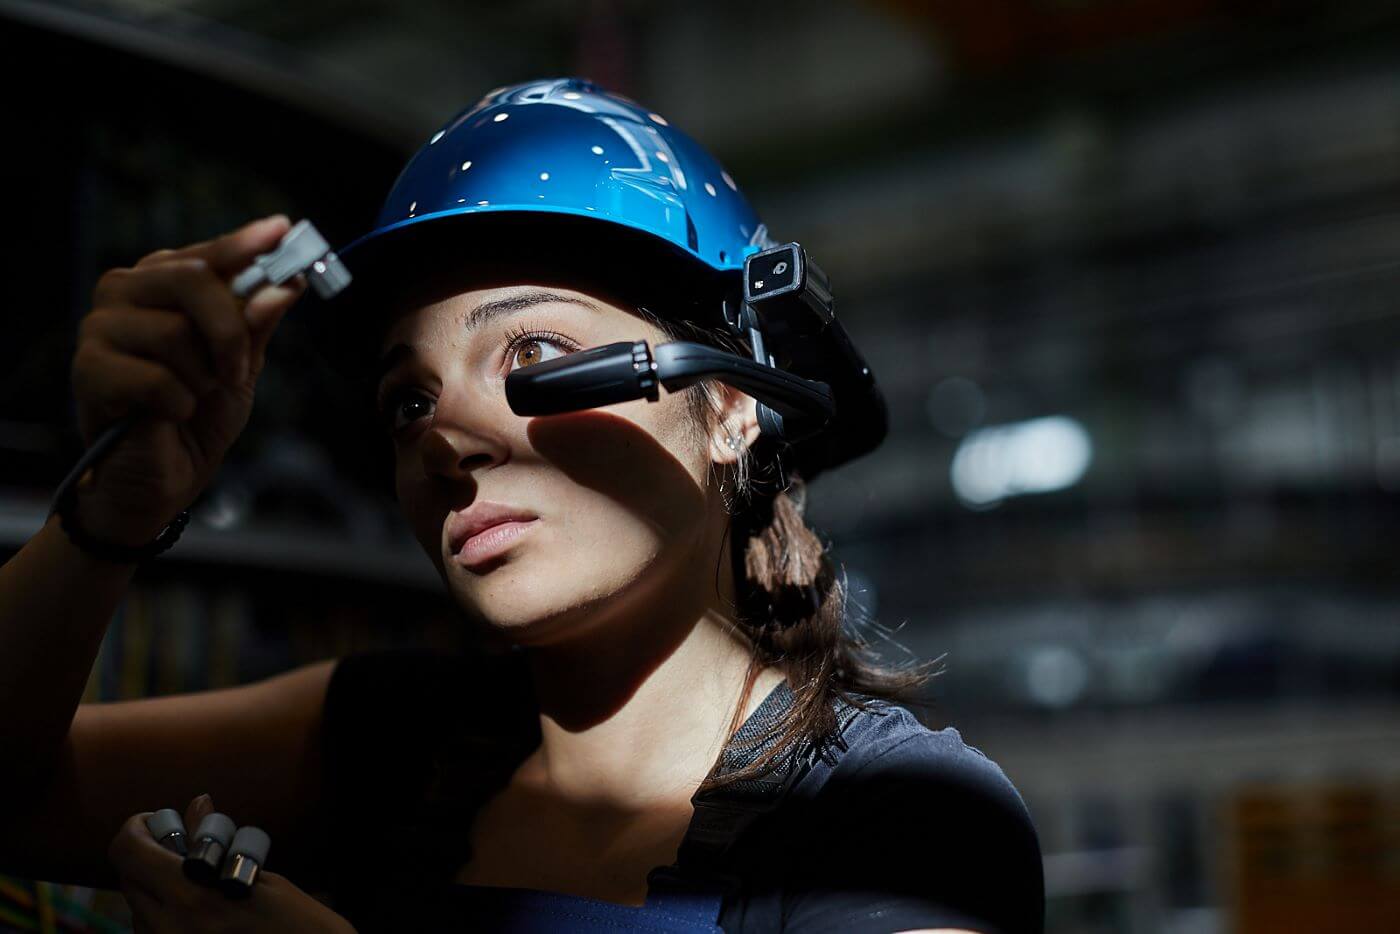 Imint and RealWear Partner on HMT-1 Series AR Headset for Frontline Workers